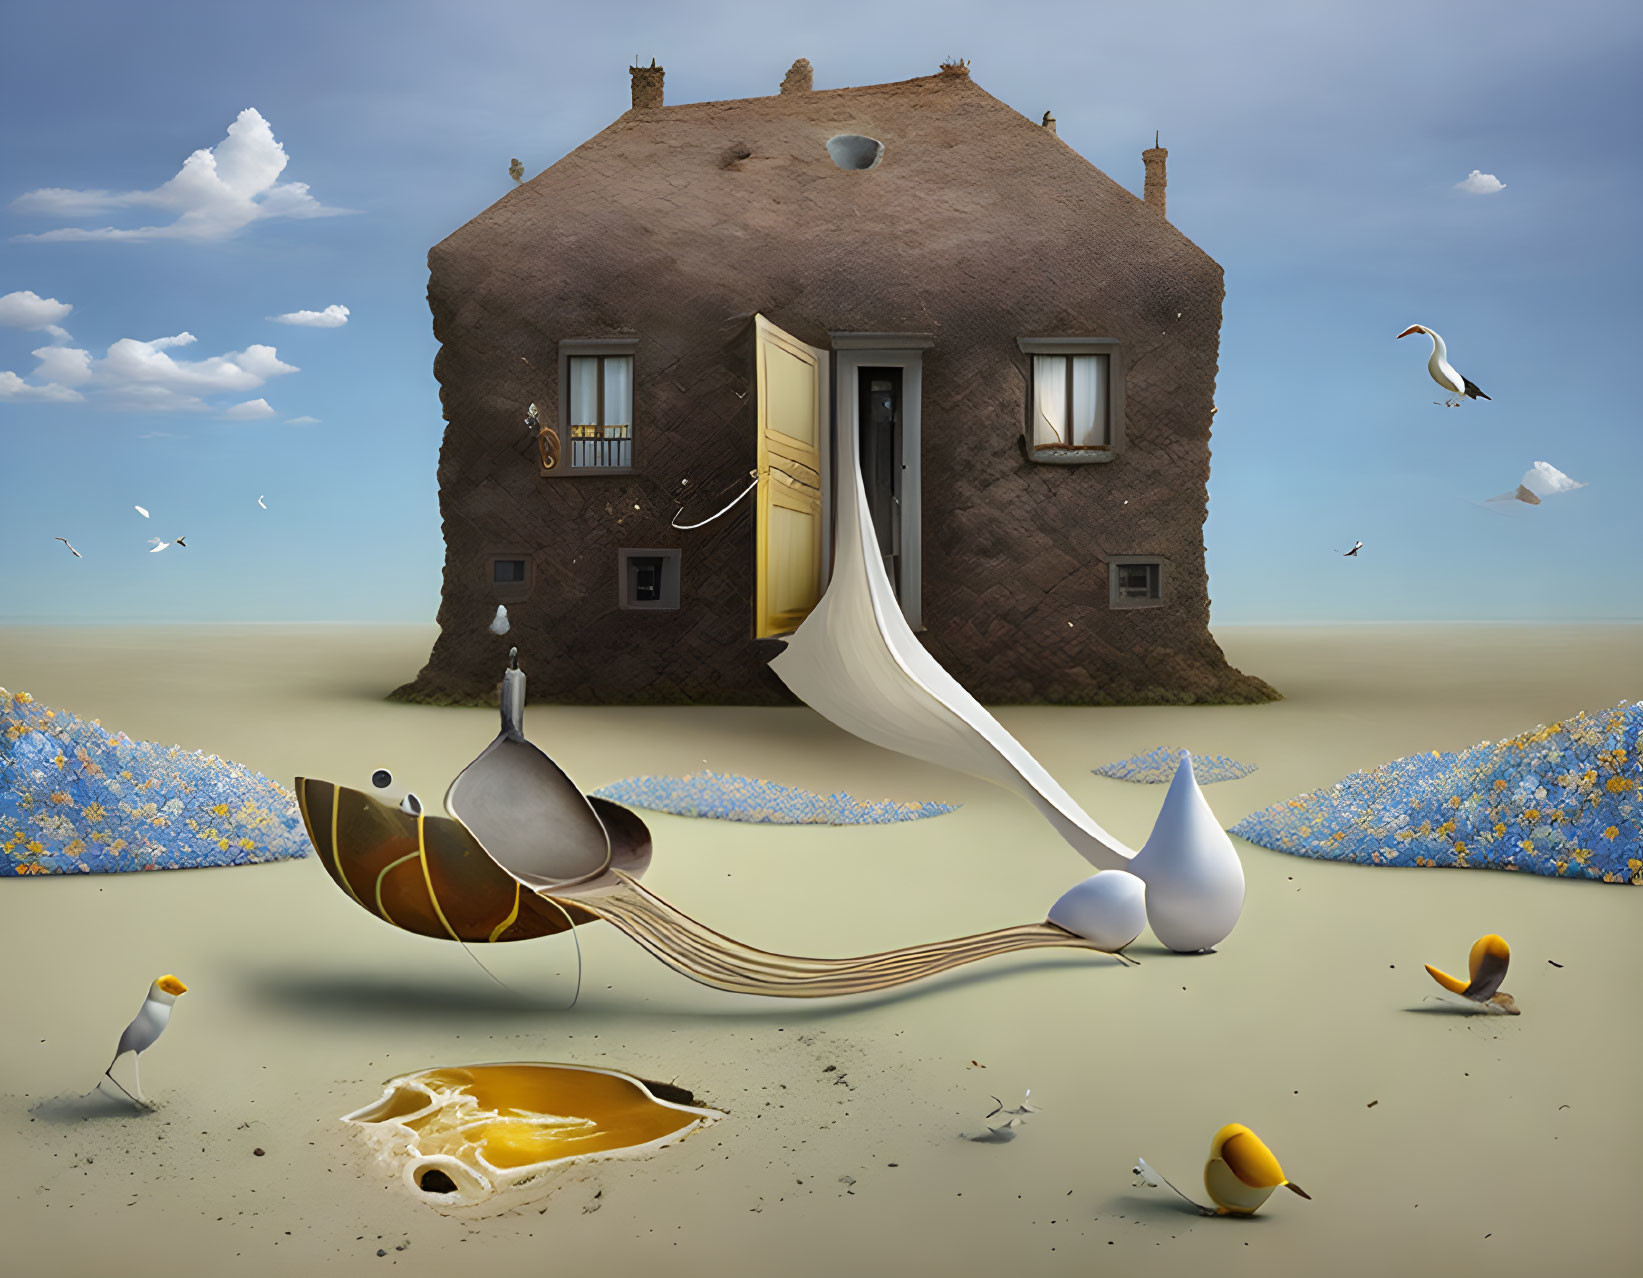 Surreal landscape with fur-covered house, flowing staircase, broken eggshells, and musical instruments